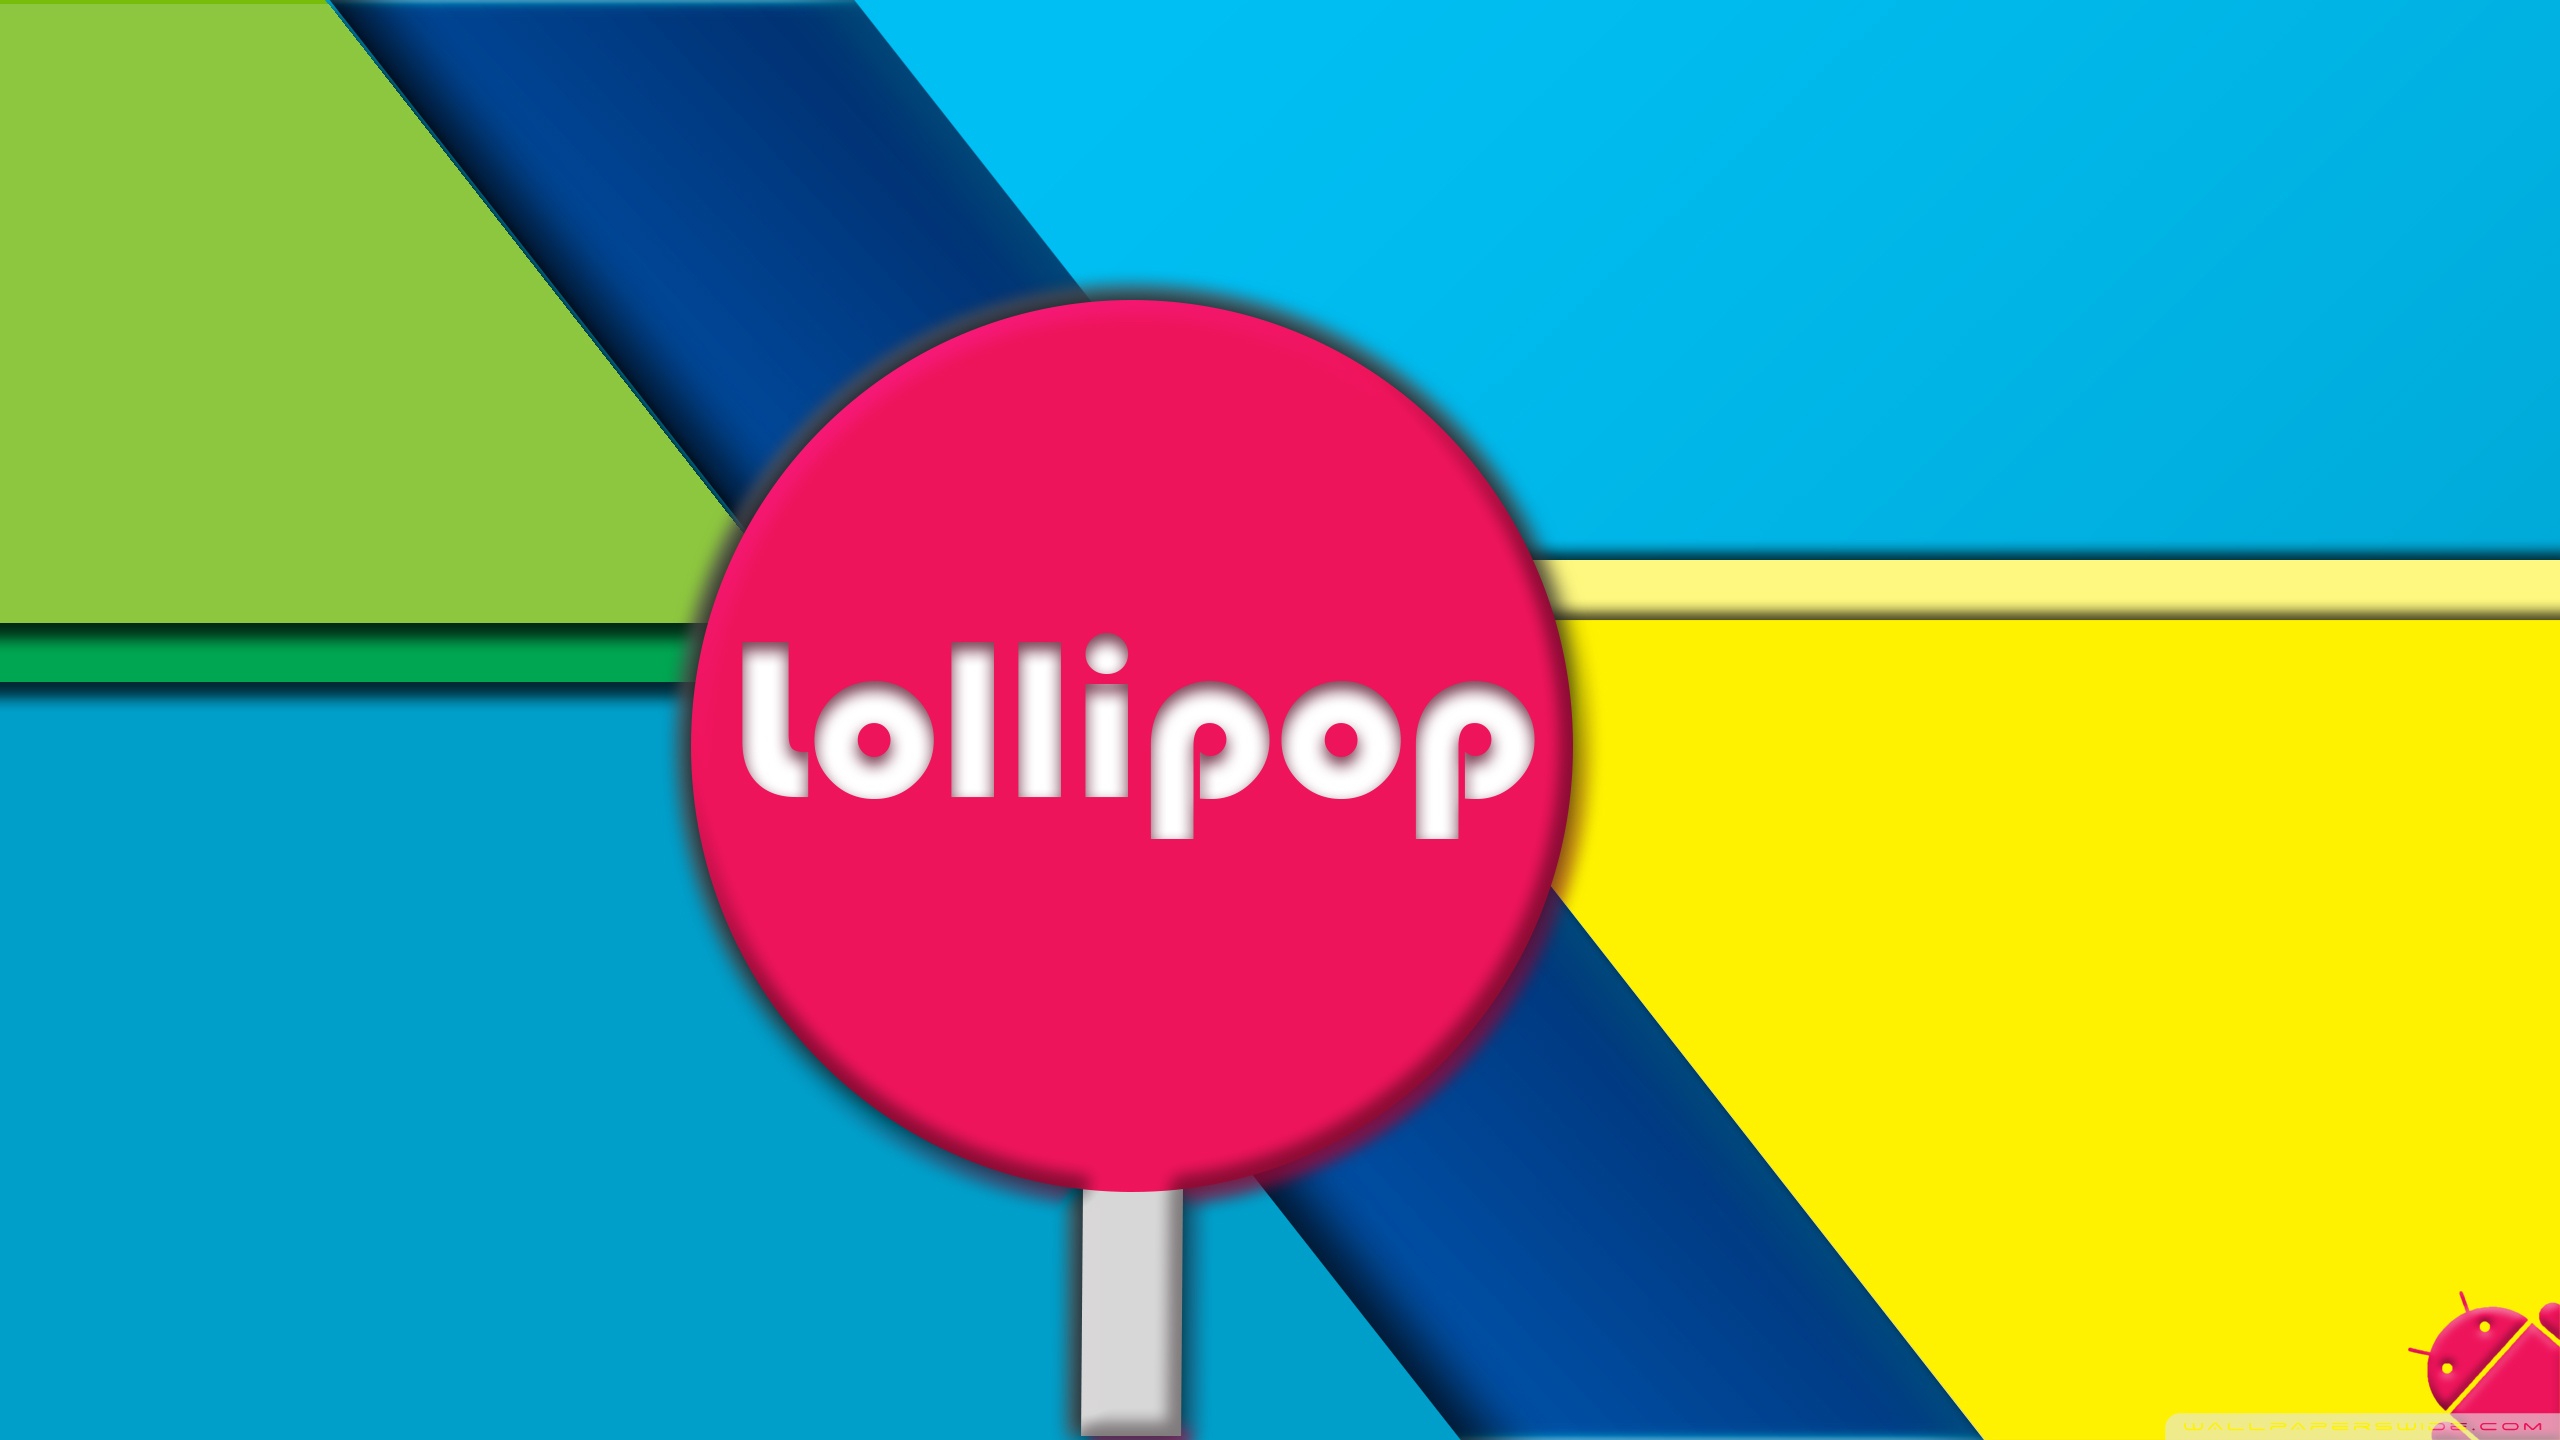 Hd Wallpapers For Android Lollipop - Hd Wallpaper Material Lollipop , HD Wallpaper & Backgrounds